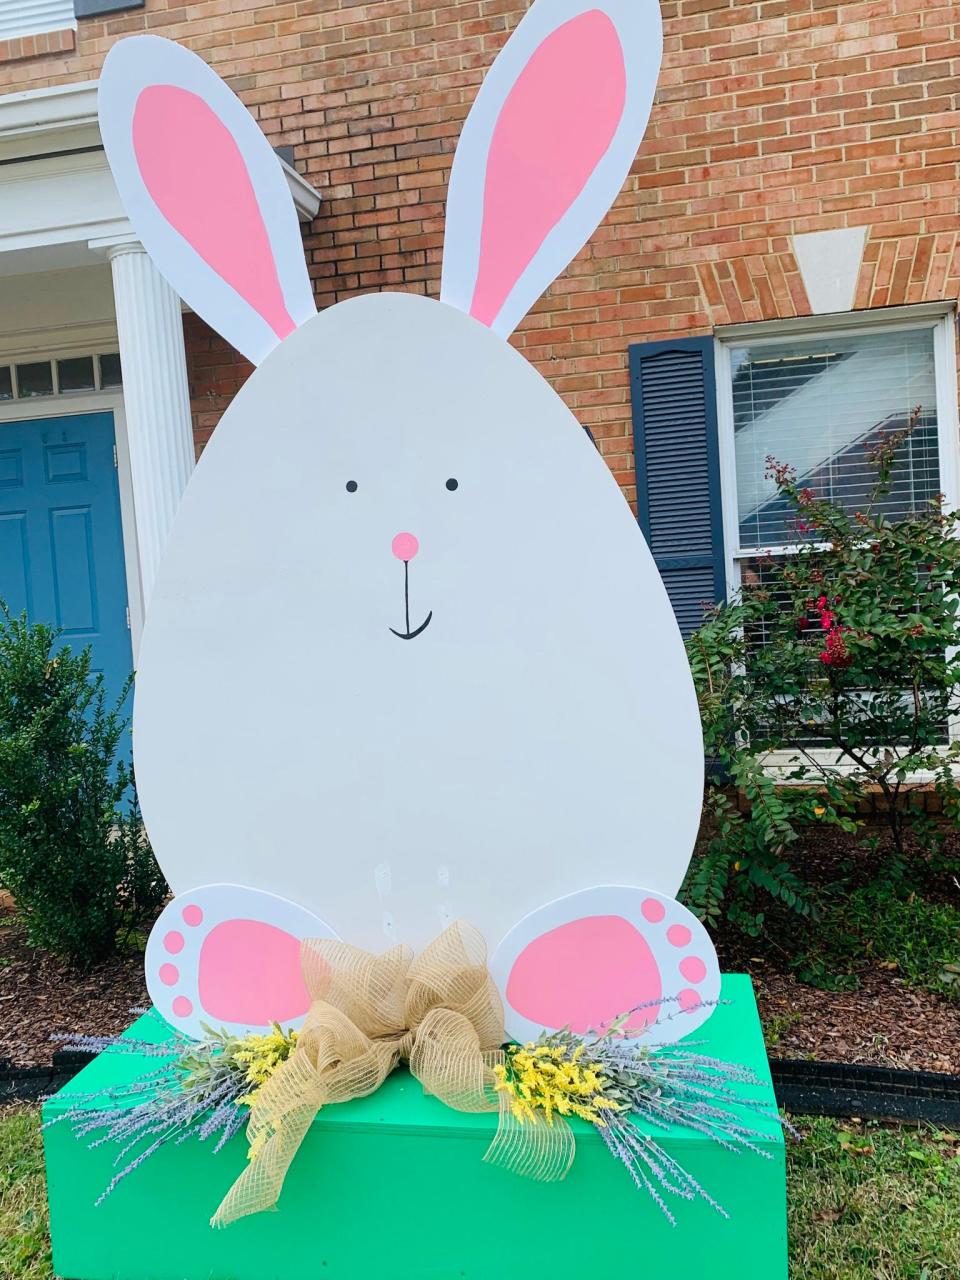 Northport Bunny Trail will kick off this spring.